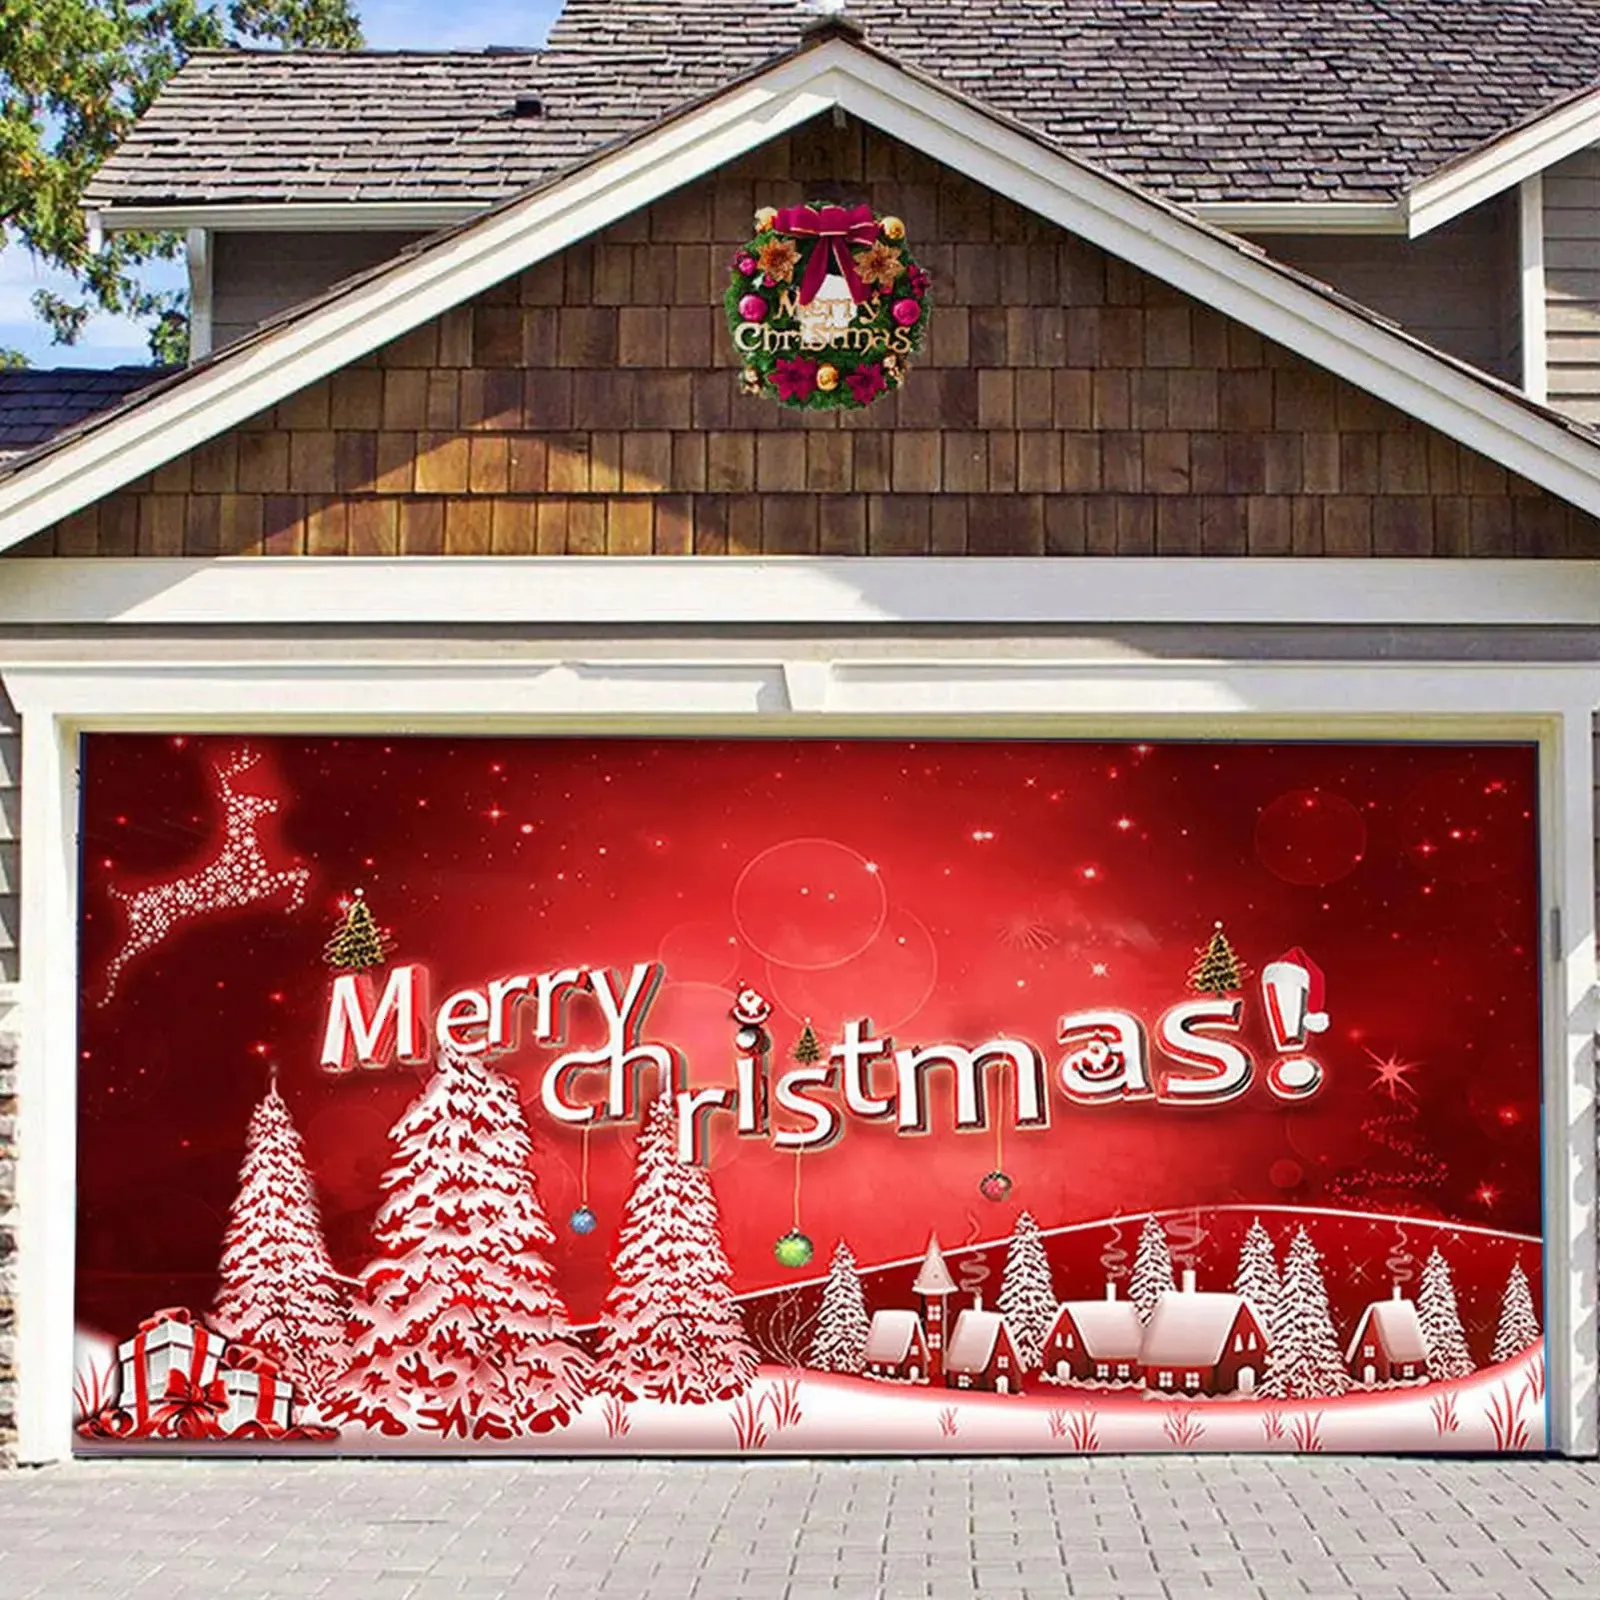 TAPESTERIES Outdoor Christmas Holiday Garage Door Banner Cover Xmas Santa Claus Snowman Backdrop Decoration Merry Christmas Garage Tapestry 231207